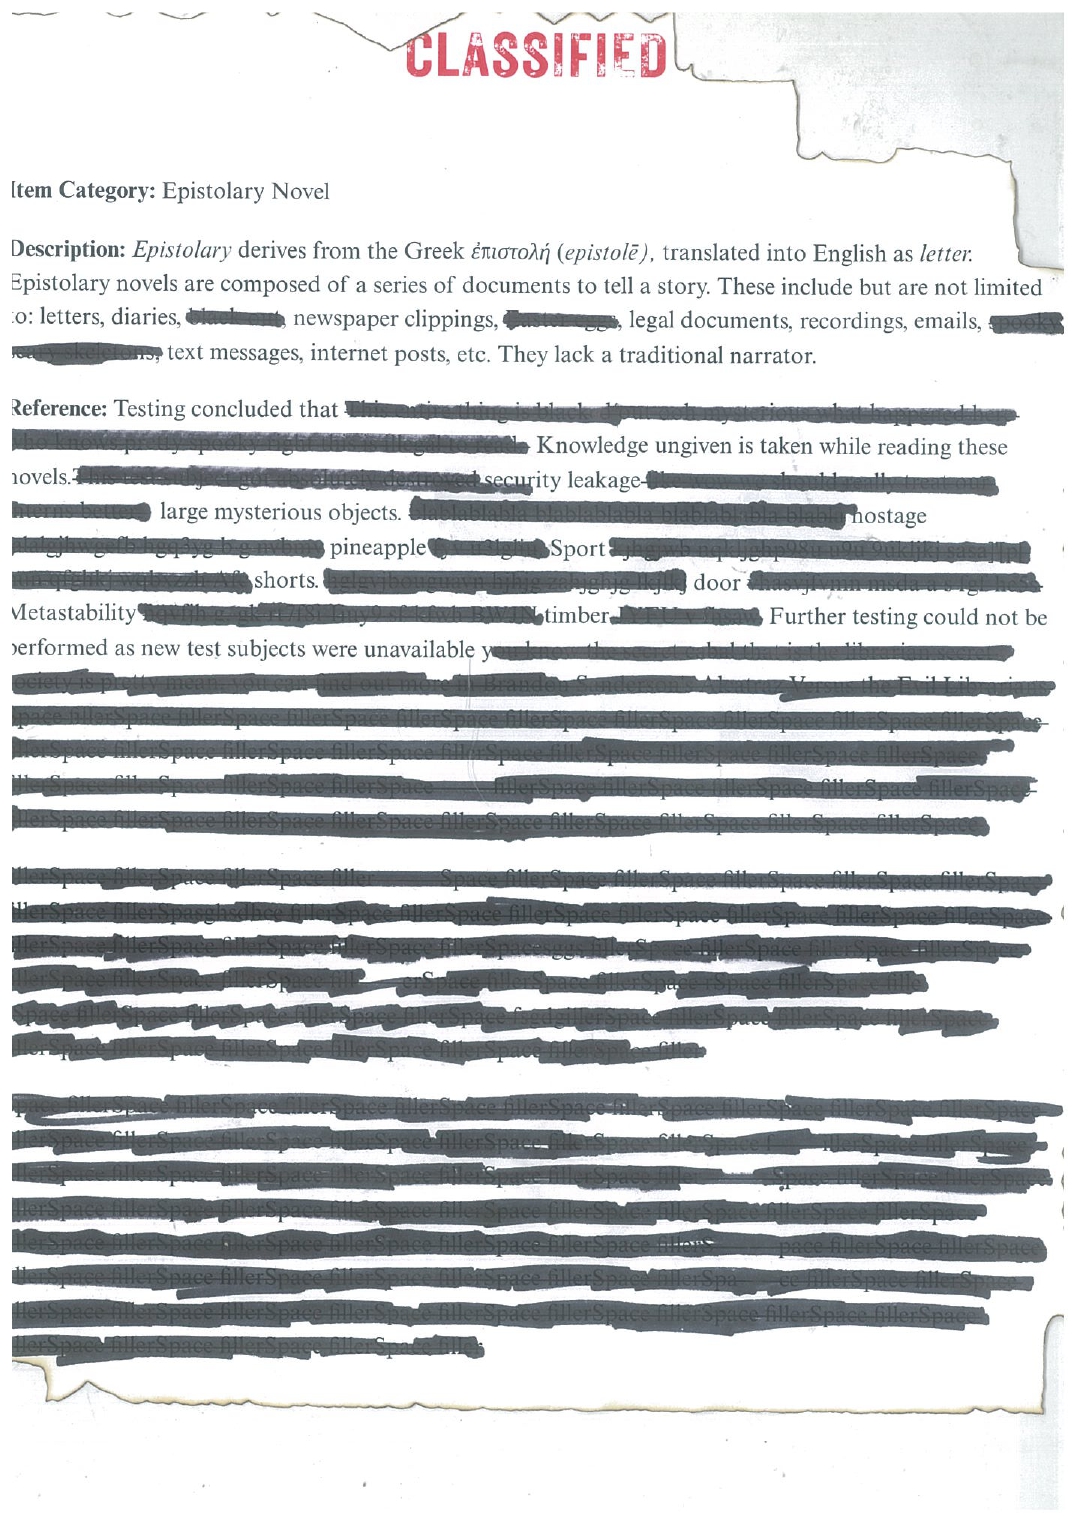 A scanned copy of a classified document that has been liberally redacted. Reading: Item Category: Epistolary Novel Description: Epistolary derives from the Greek ἐπιστολή (epistolē), translated into English as letter. Epistolary novels are composed of a series of documents to tell a story. These include but are not limited to: letters, diaries, REDACTED, newspaper clippings, REDACTED, legal documents, recordings, emails, REDACTED, text messages, internet posts, etc. They lack a traditional narrator. Reference: Testing concluded that REDACTED Knowledge ungiven is taken while reading these novels.REDACTED security leakage REDACTED large mysterious objects. REDACTED hostage REDACTED pineapple REDACTED Sport REDACTED shorts. REDACTED door REDACTED Metastability REDACTED timber REDACTED Further testing could not be performed as new test subjects were unavailable REDACTED REDACTED REDACTED